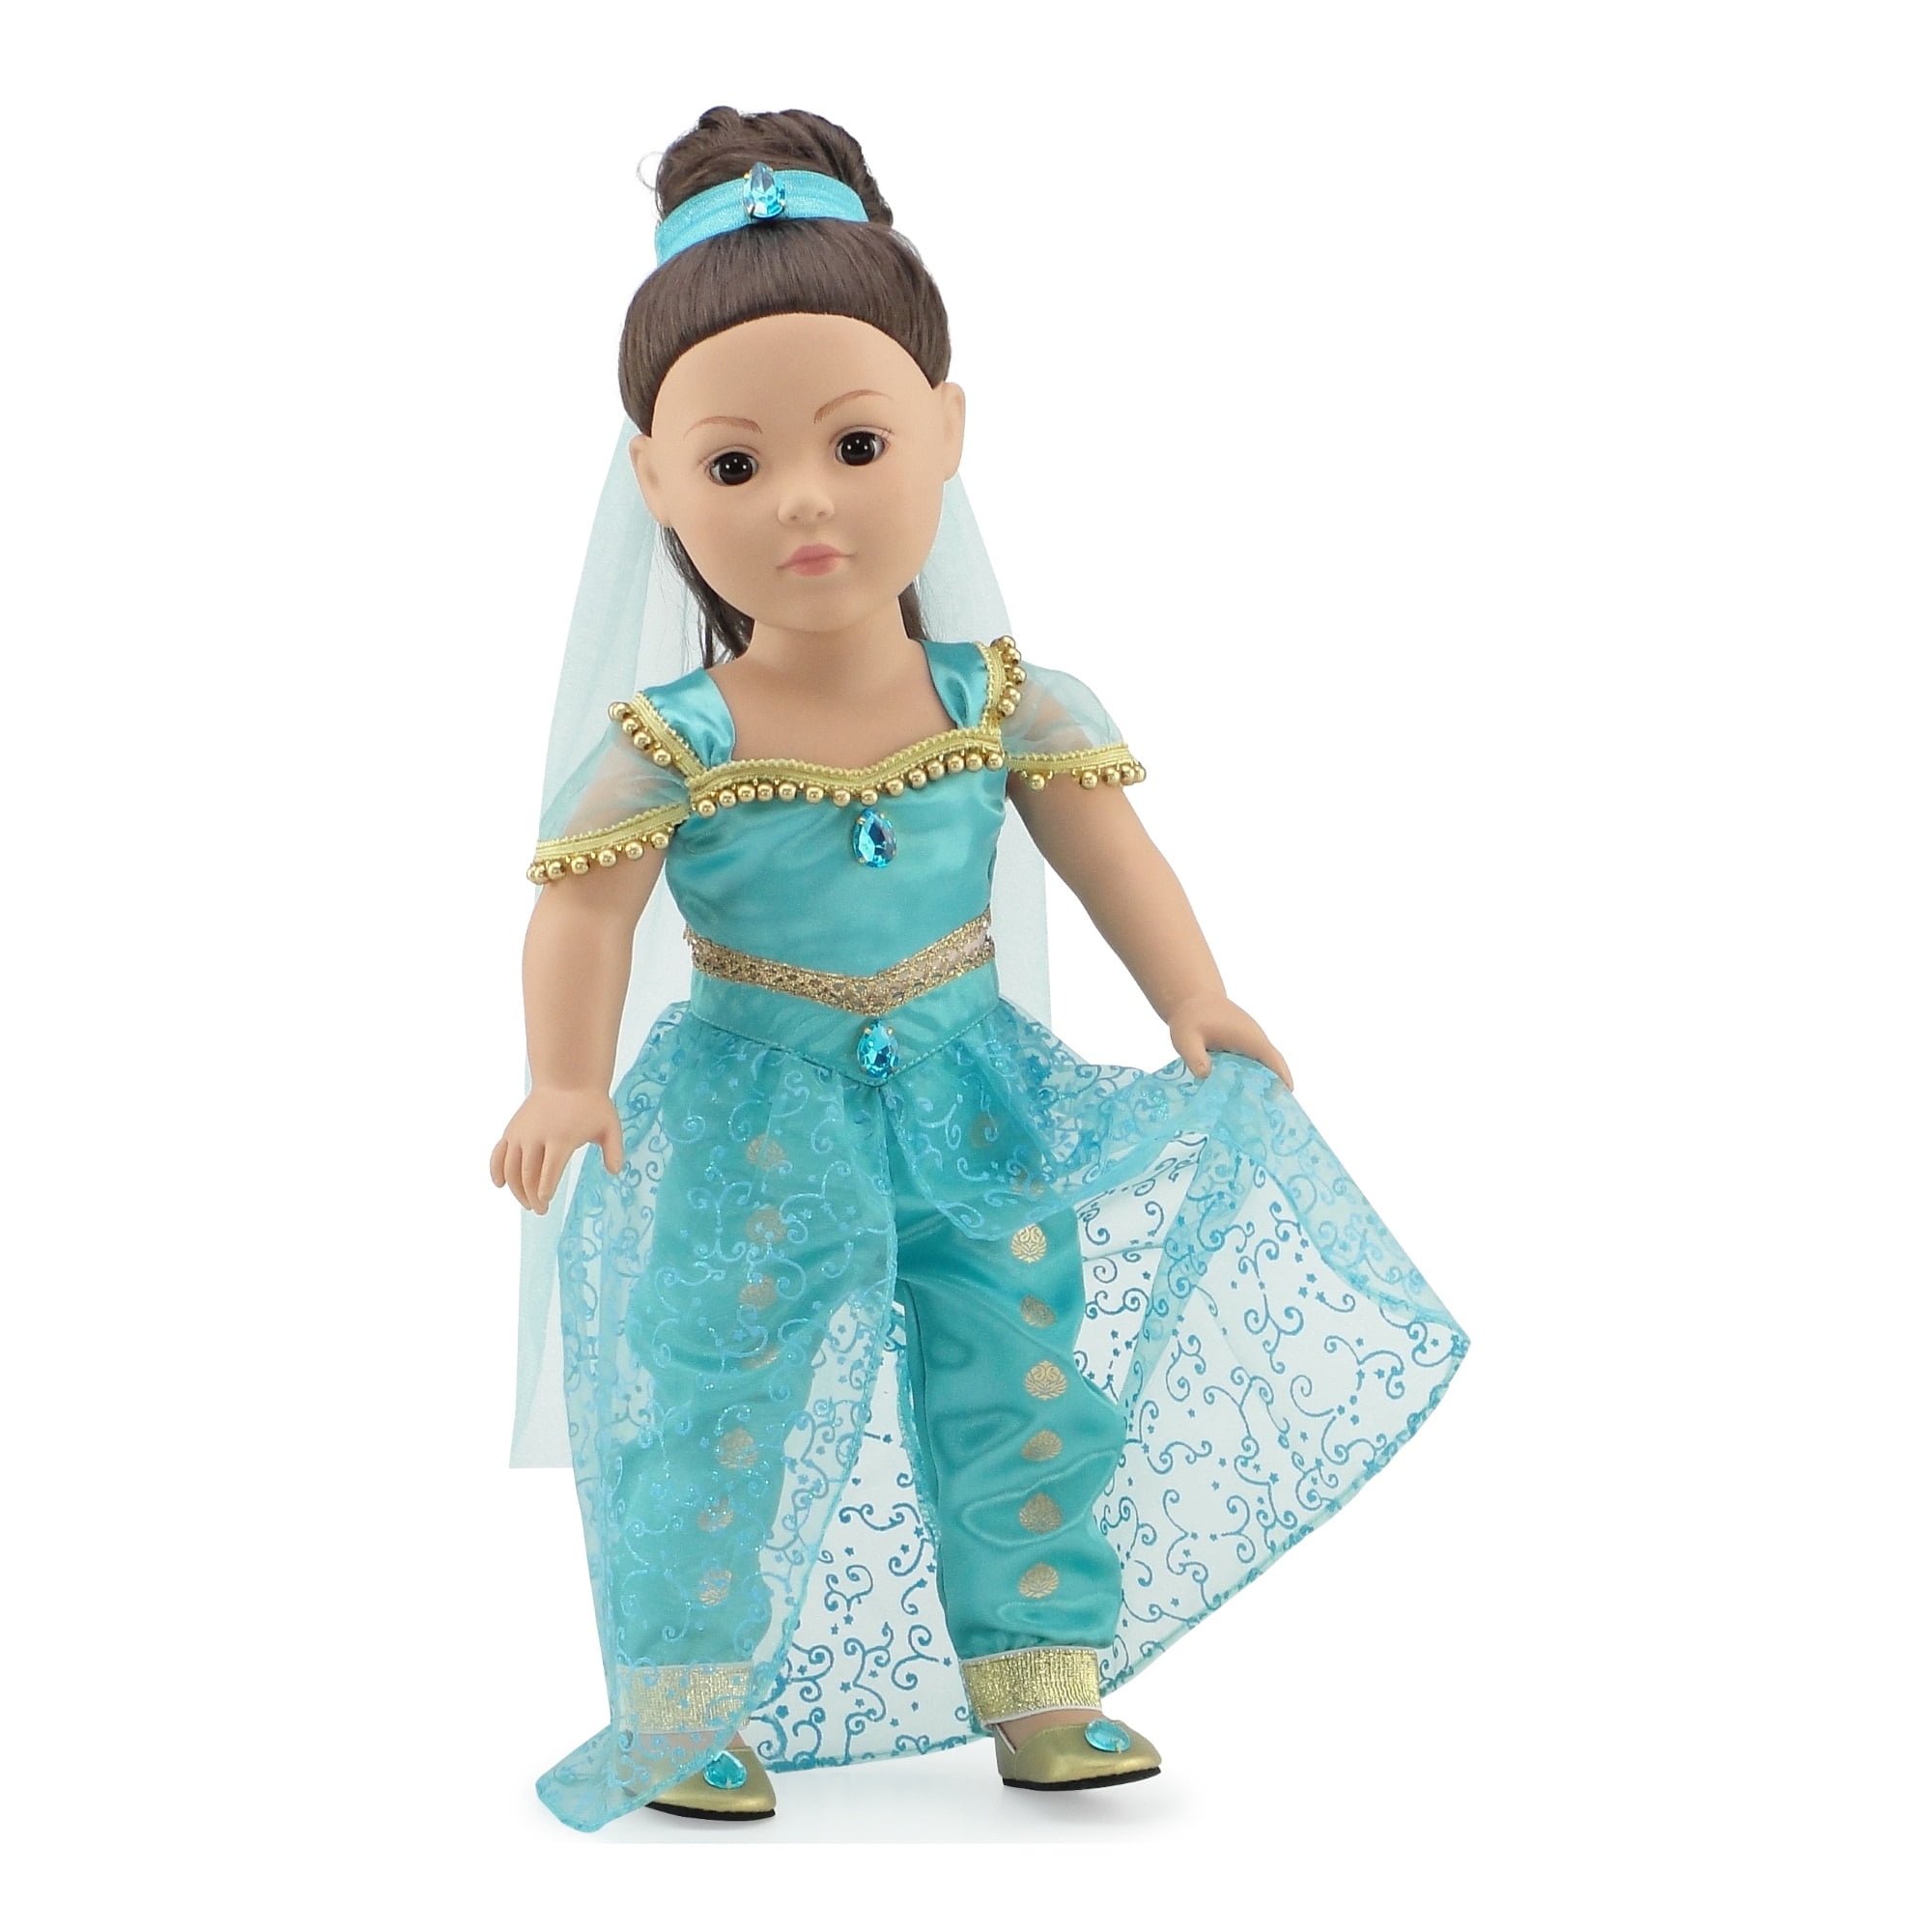 Doll Clothes Belle Village Dress for 18 Inch American Girl Dolls 